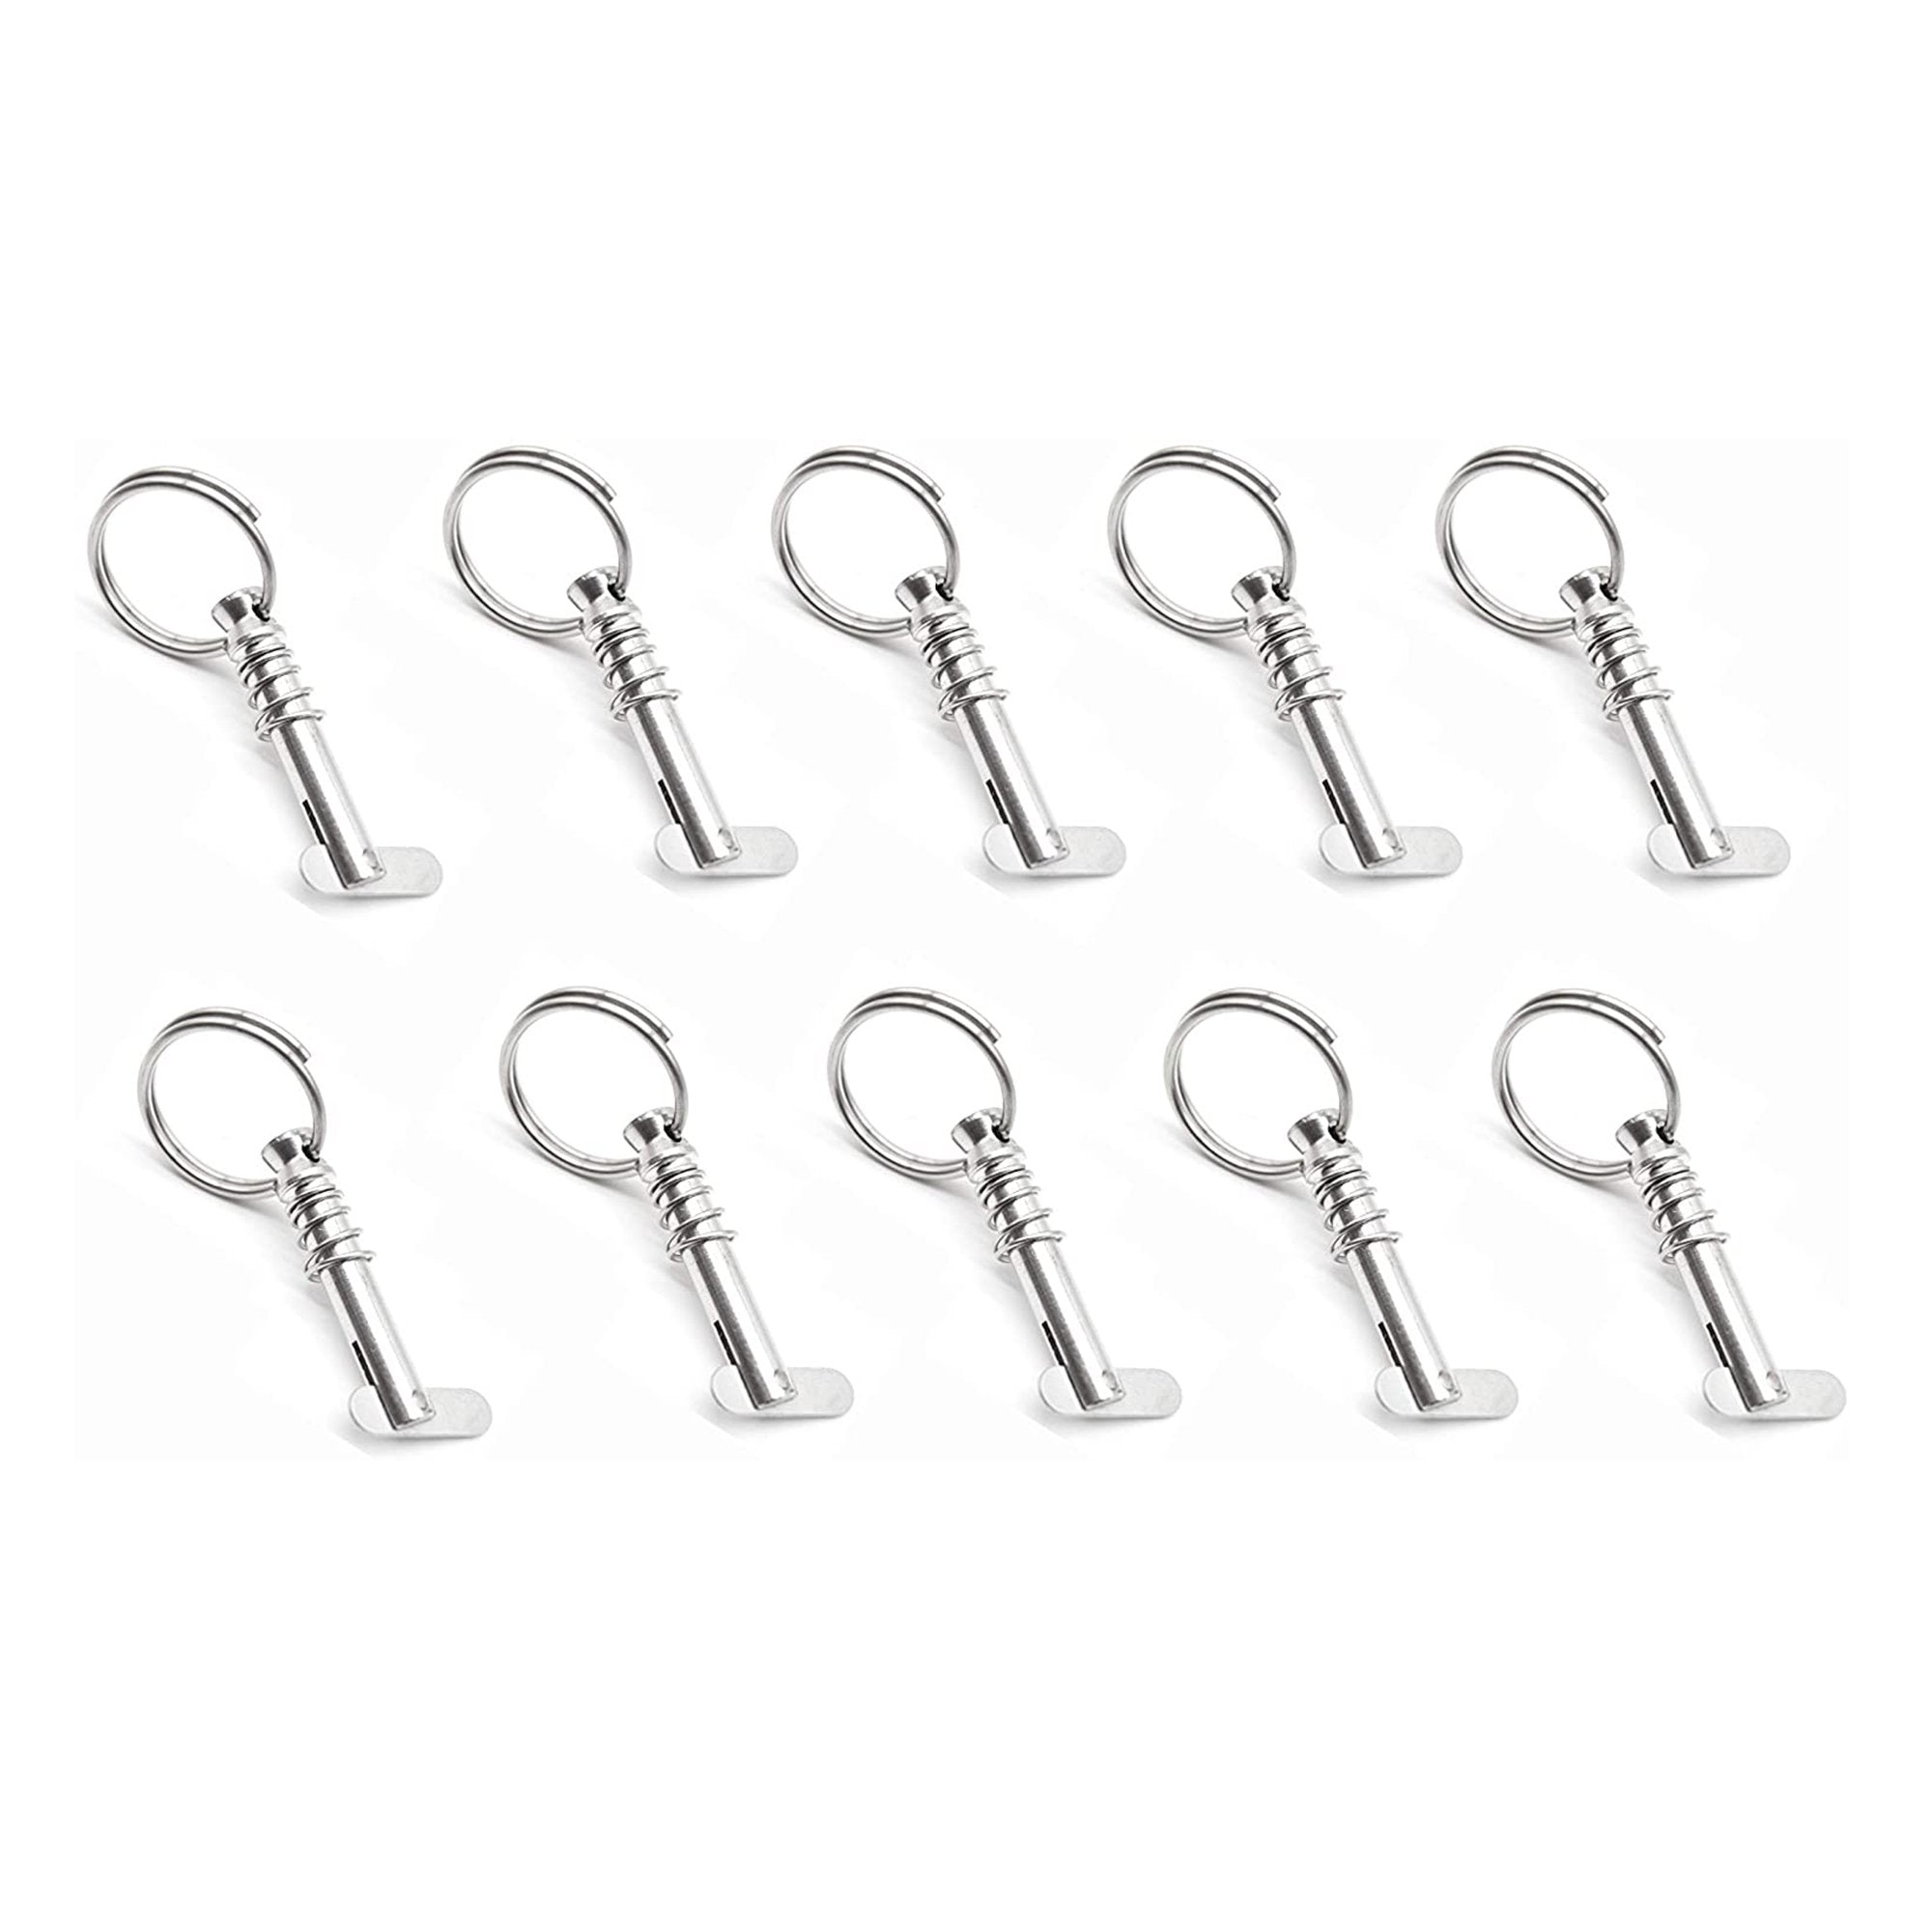 Searoam Boat Bimini Pin 4pcs Quick Release Pin 1/4' Diameter w/Lanyard Prevents Loss, Full 316 Stainless Steel, Boat Tops and Support Poles Sailboat